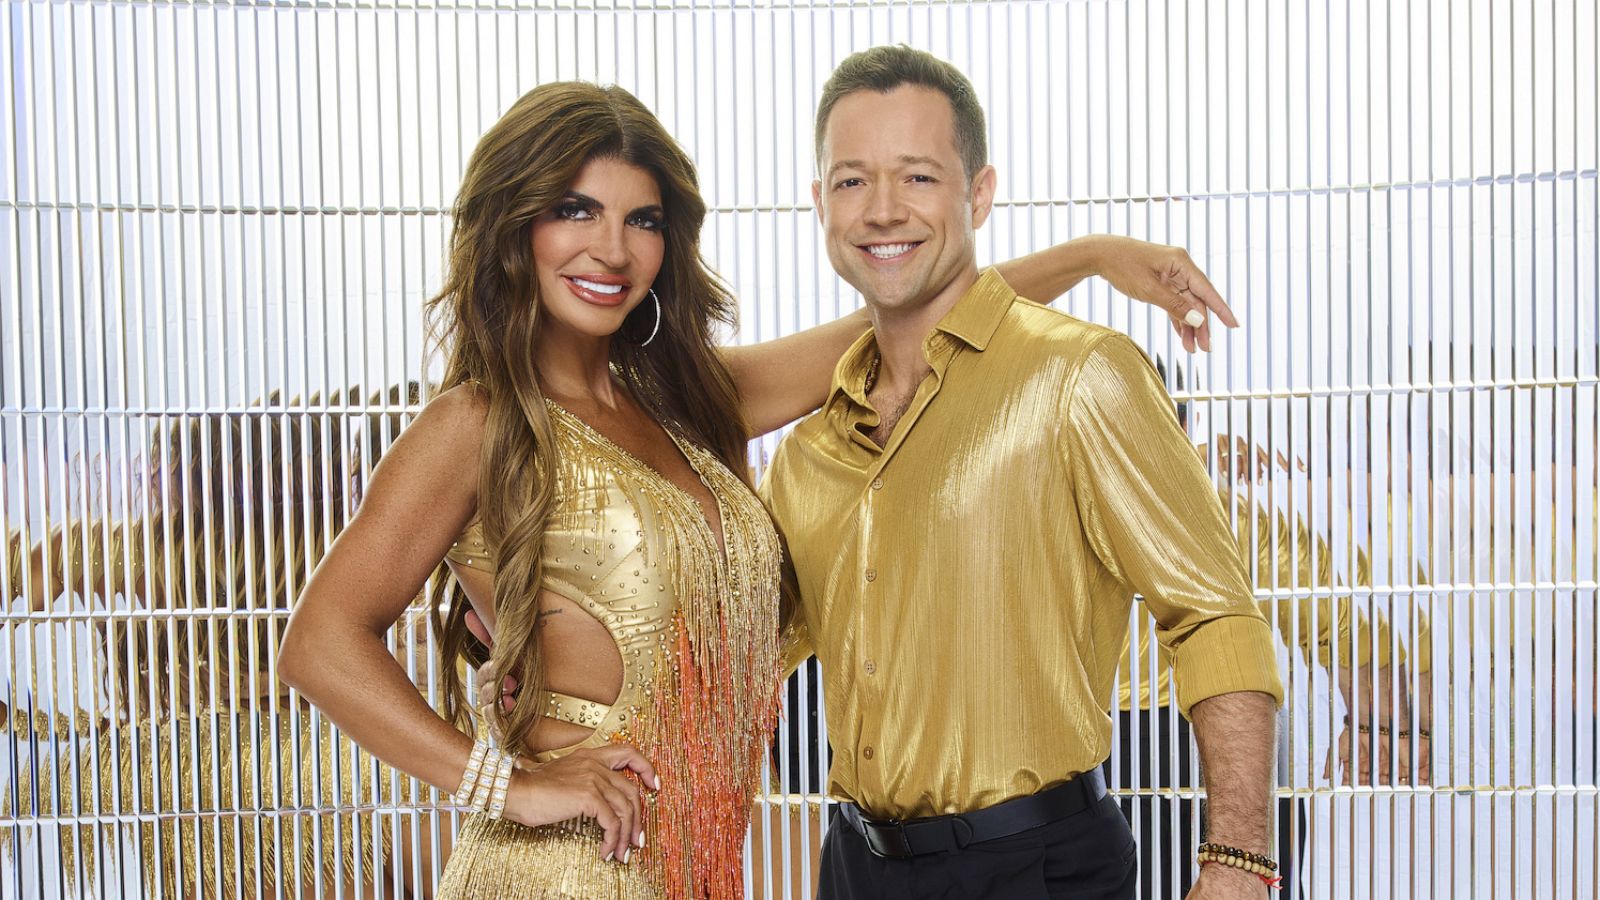 Dancing with the Stars 2022 See the official season 31 partner photos